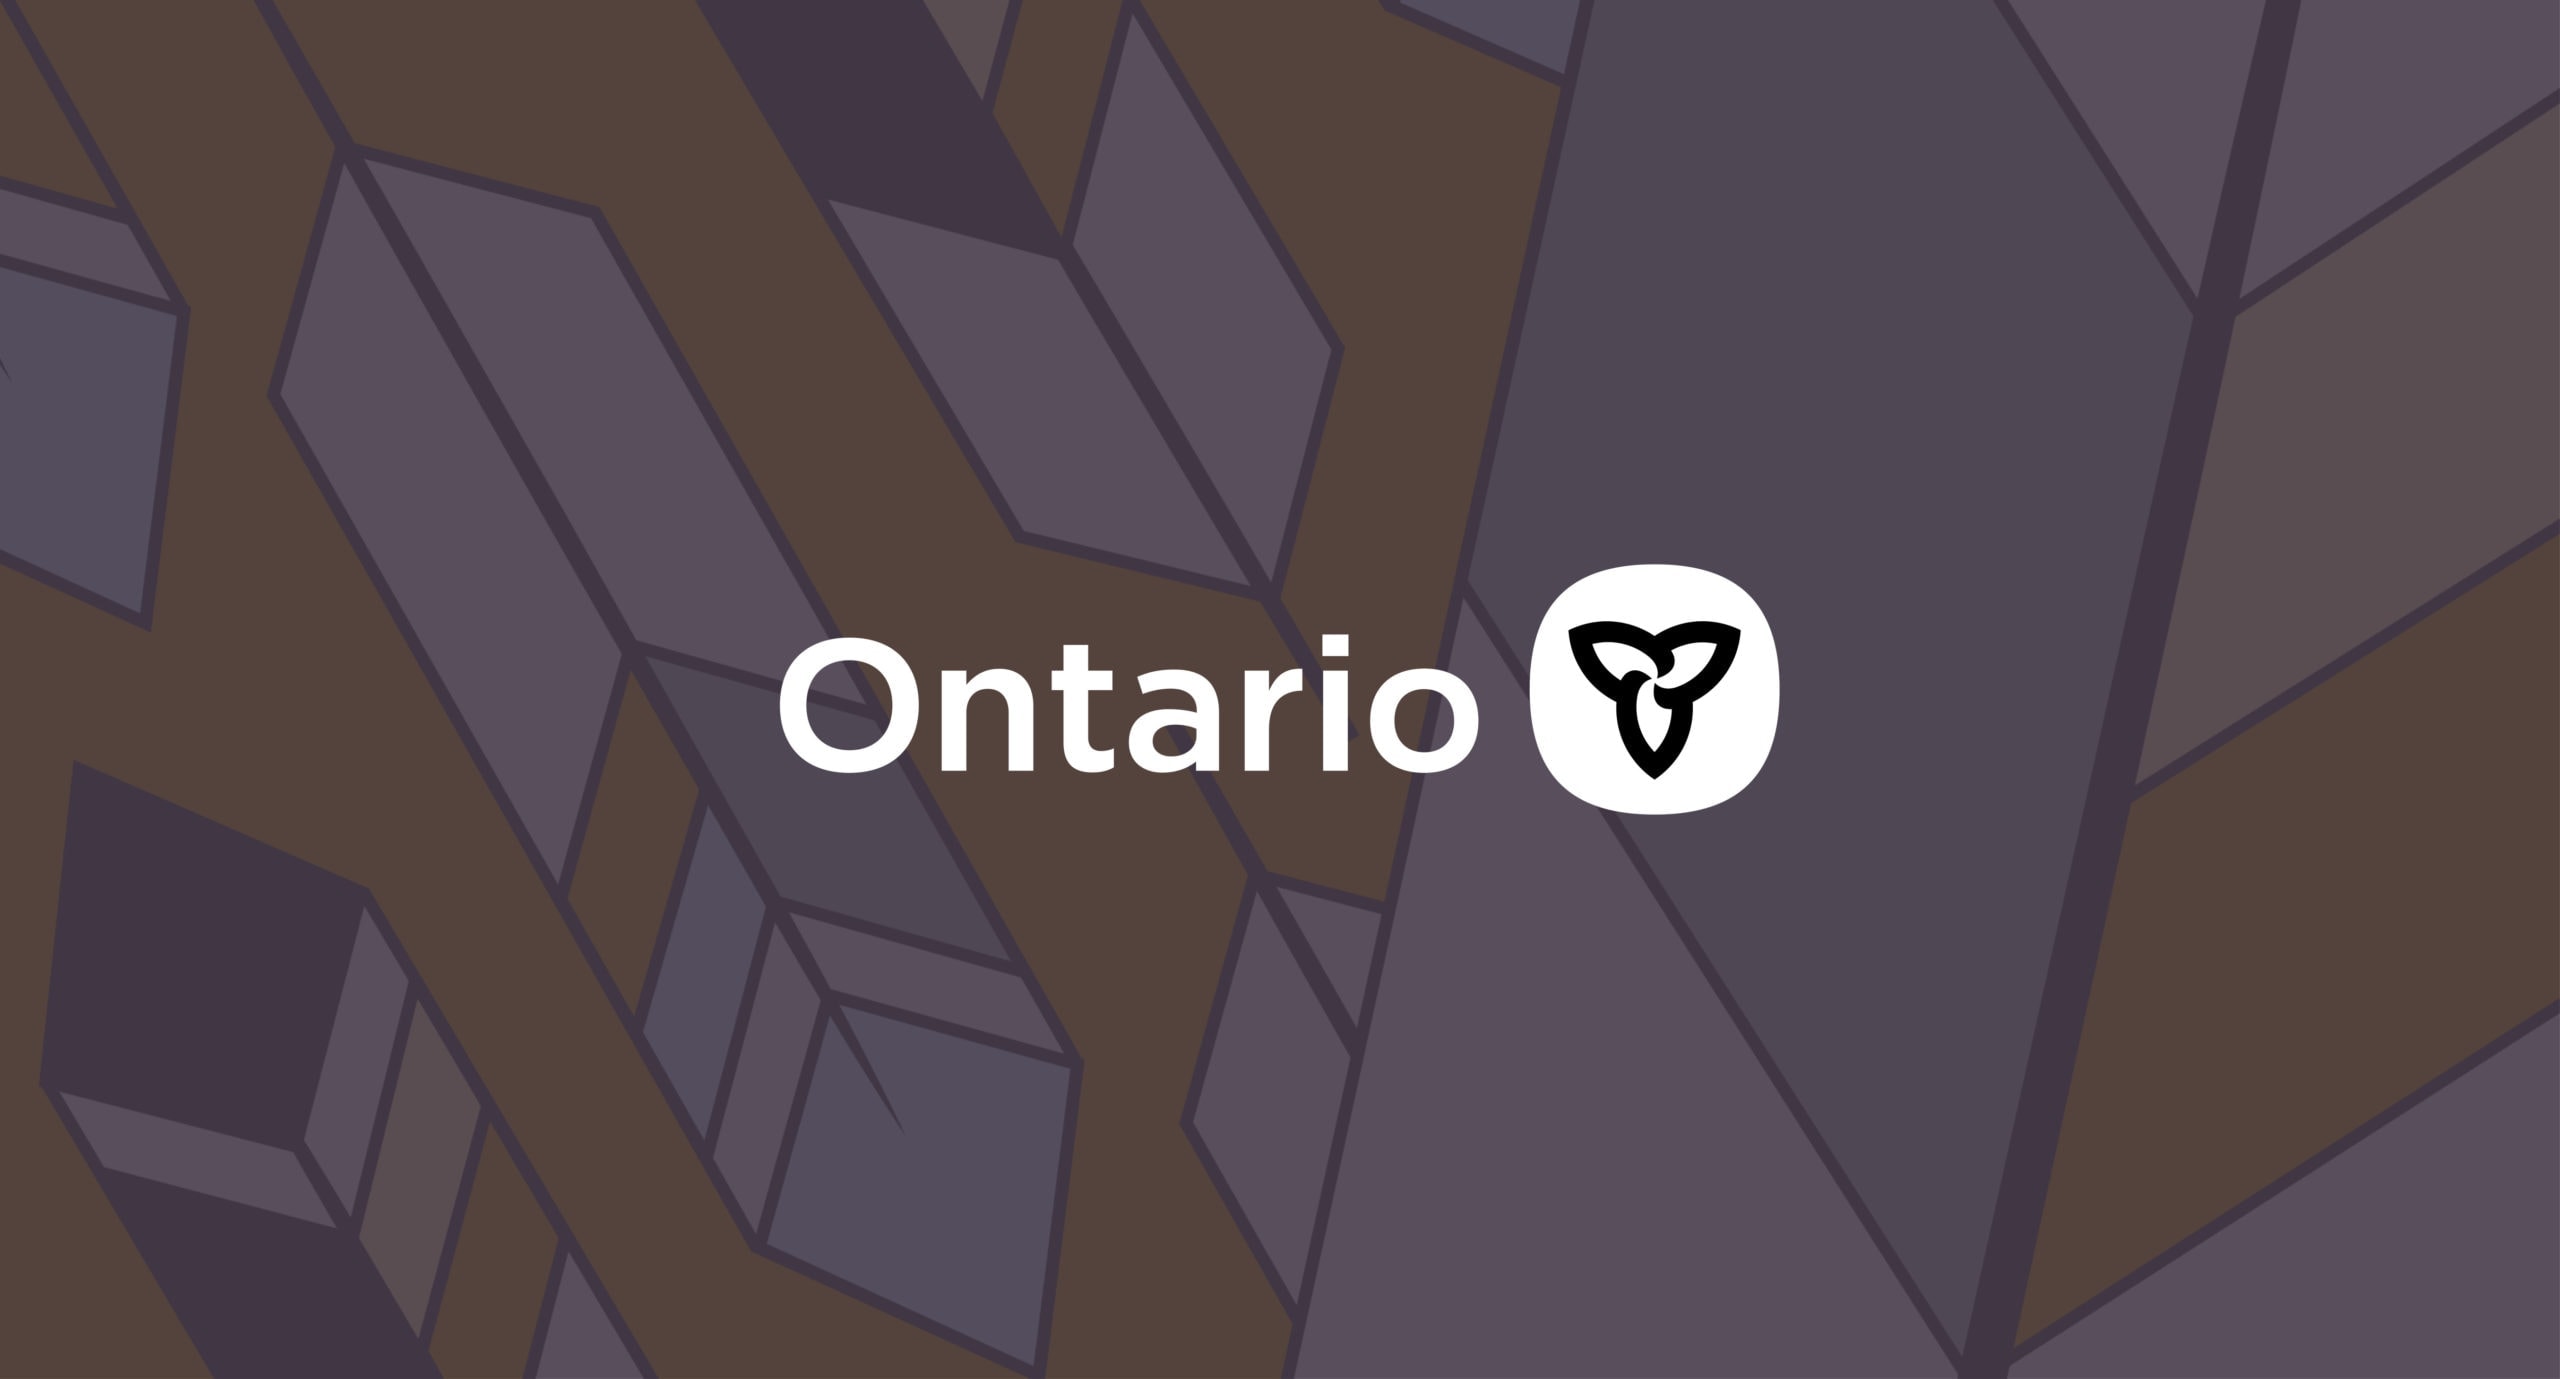 A banner image for the Government of Ontario. The background of the image features geometric feathers in a diagonal pattern on a yellow background. There is a deep purple overlay on the entire background, and in the centre of the image, the Government of Ontario logo is displayed in white. The logo reads "Ontario" and features the 3 petalled flower symbol in black, within a white, rounded square.